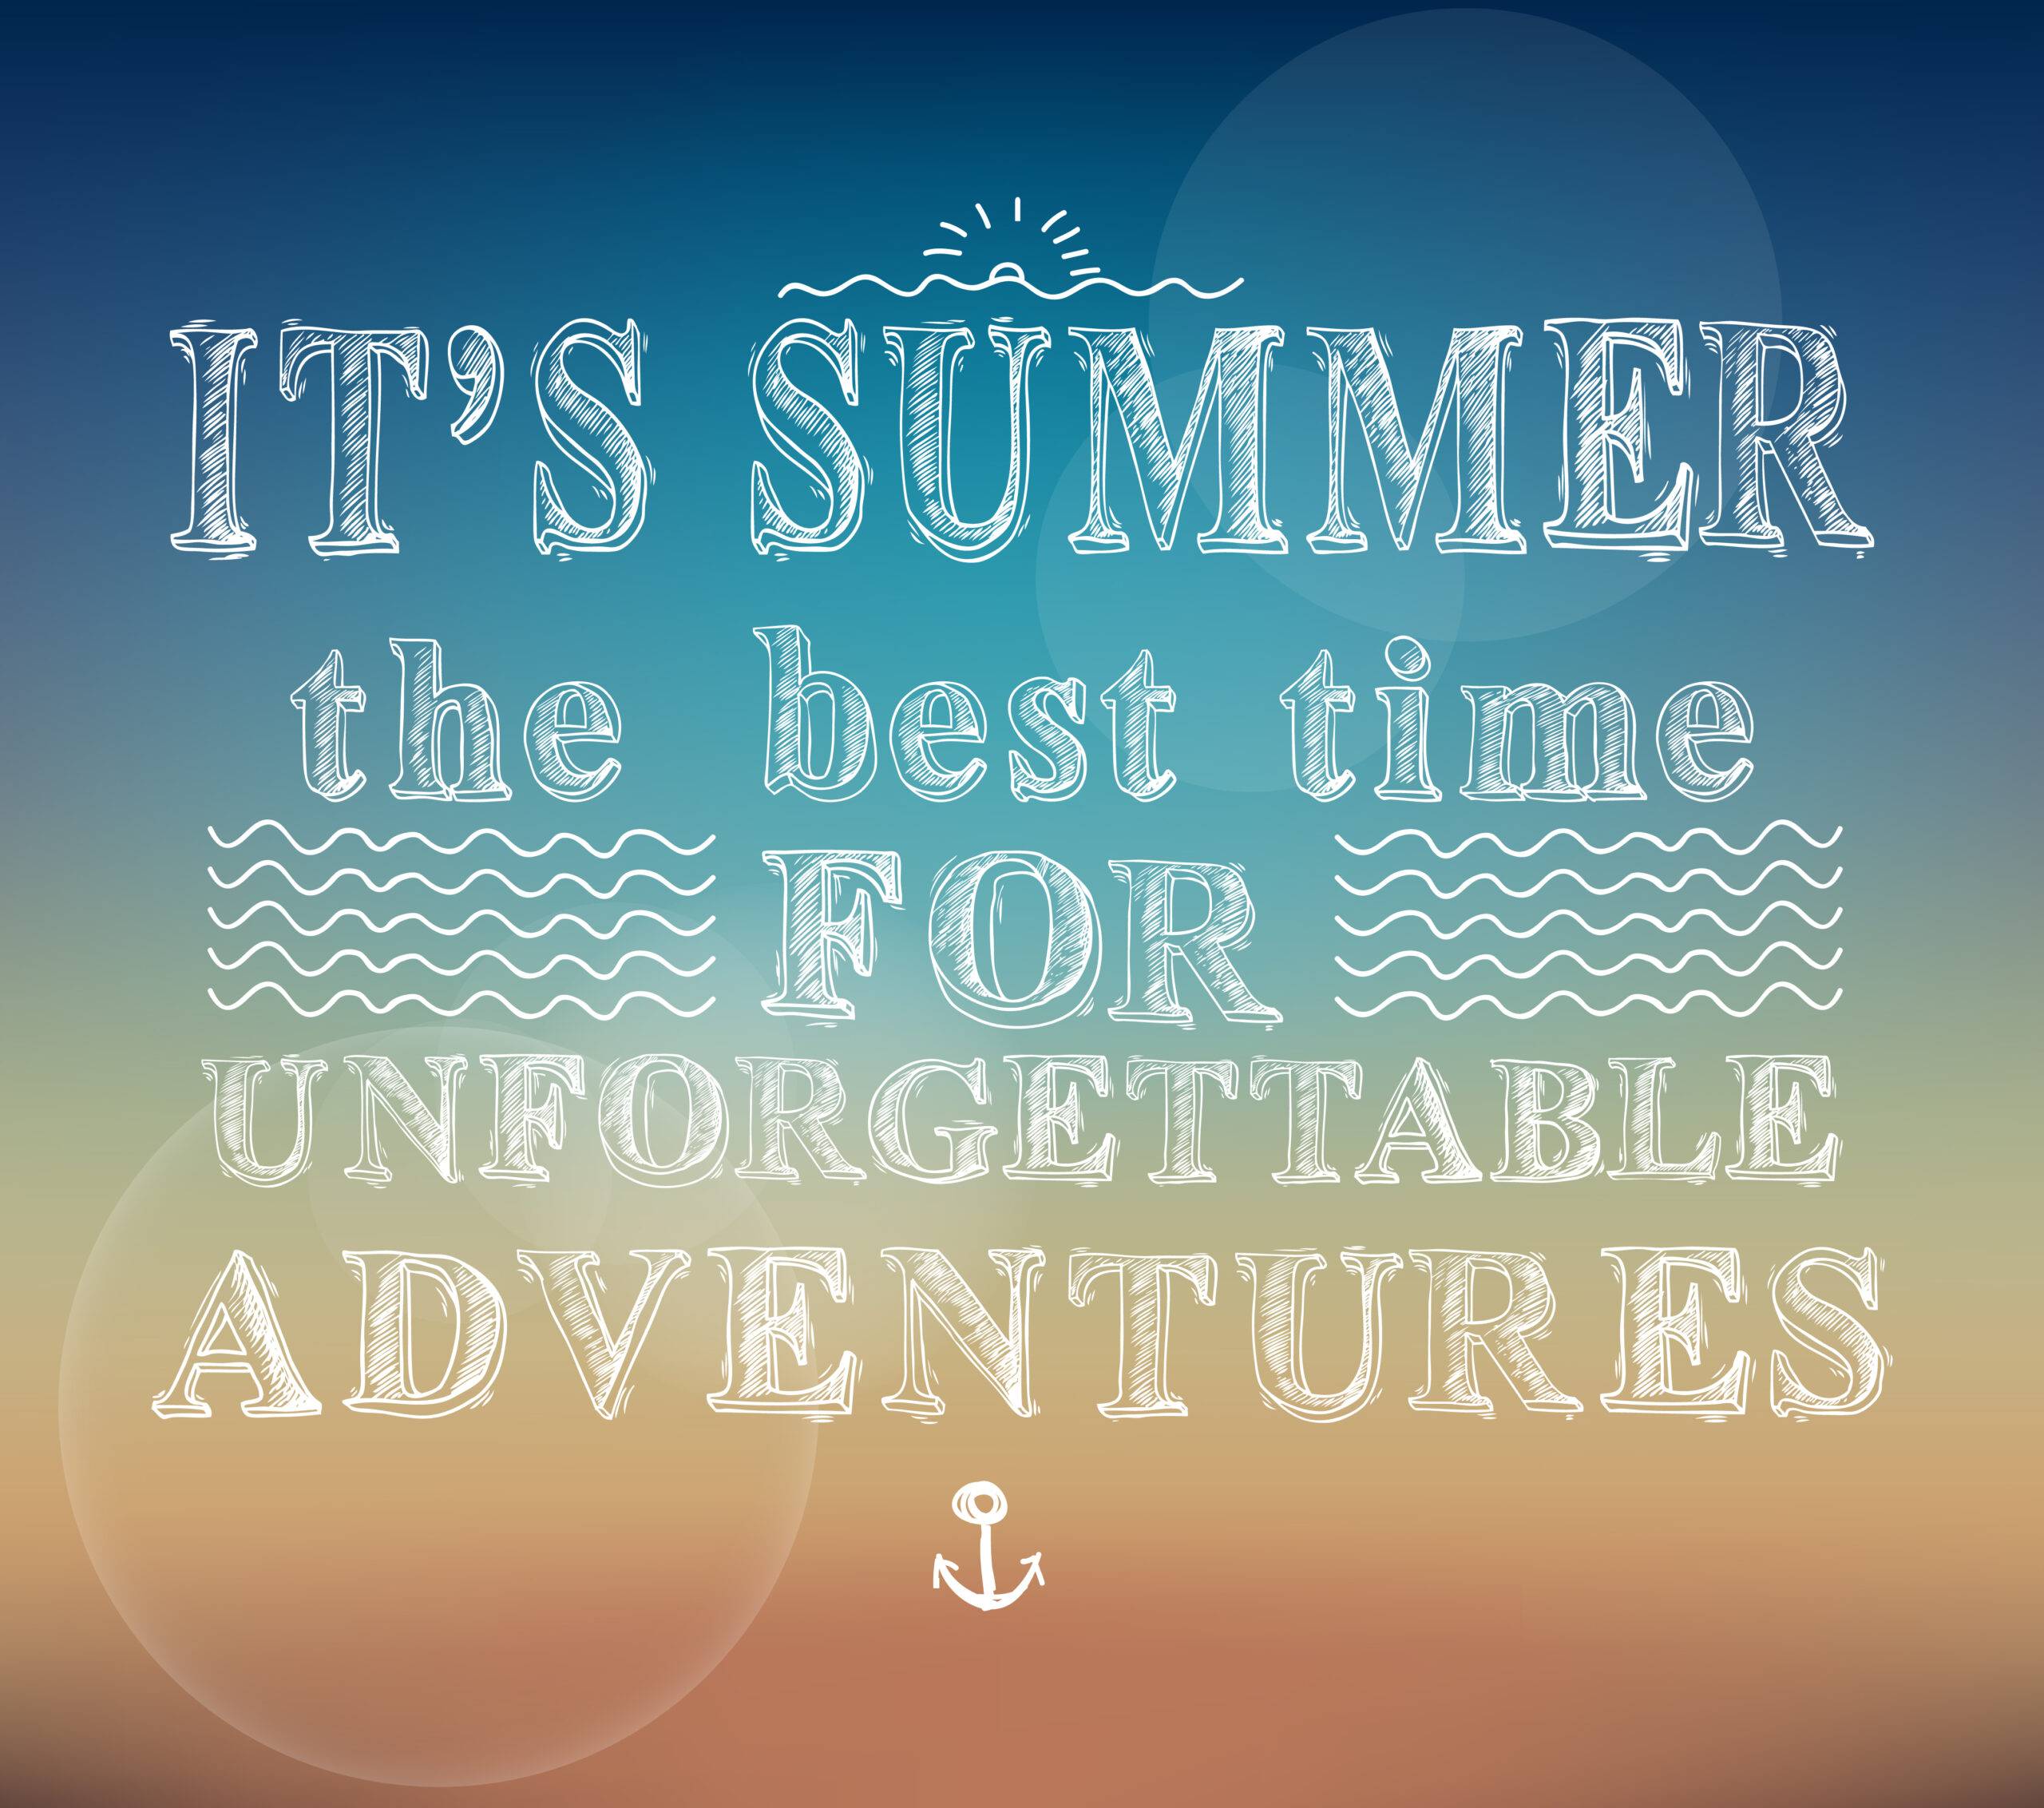 Summer adventure quote from "Ultimate Pontoon Guide" on gradient backdrop.